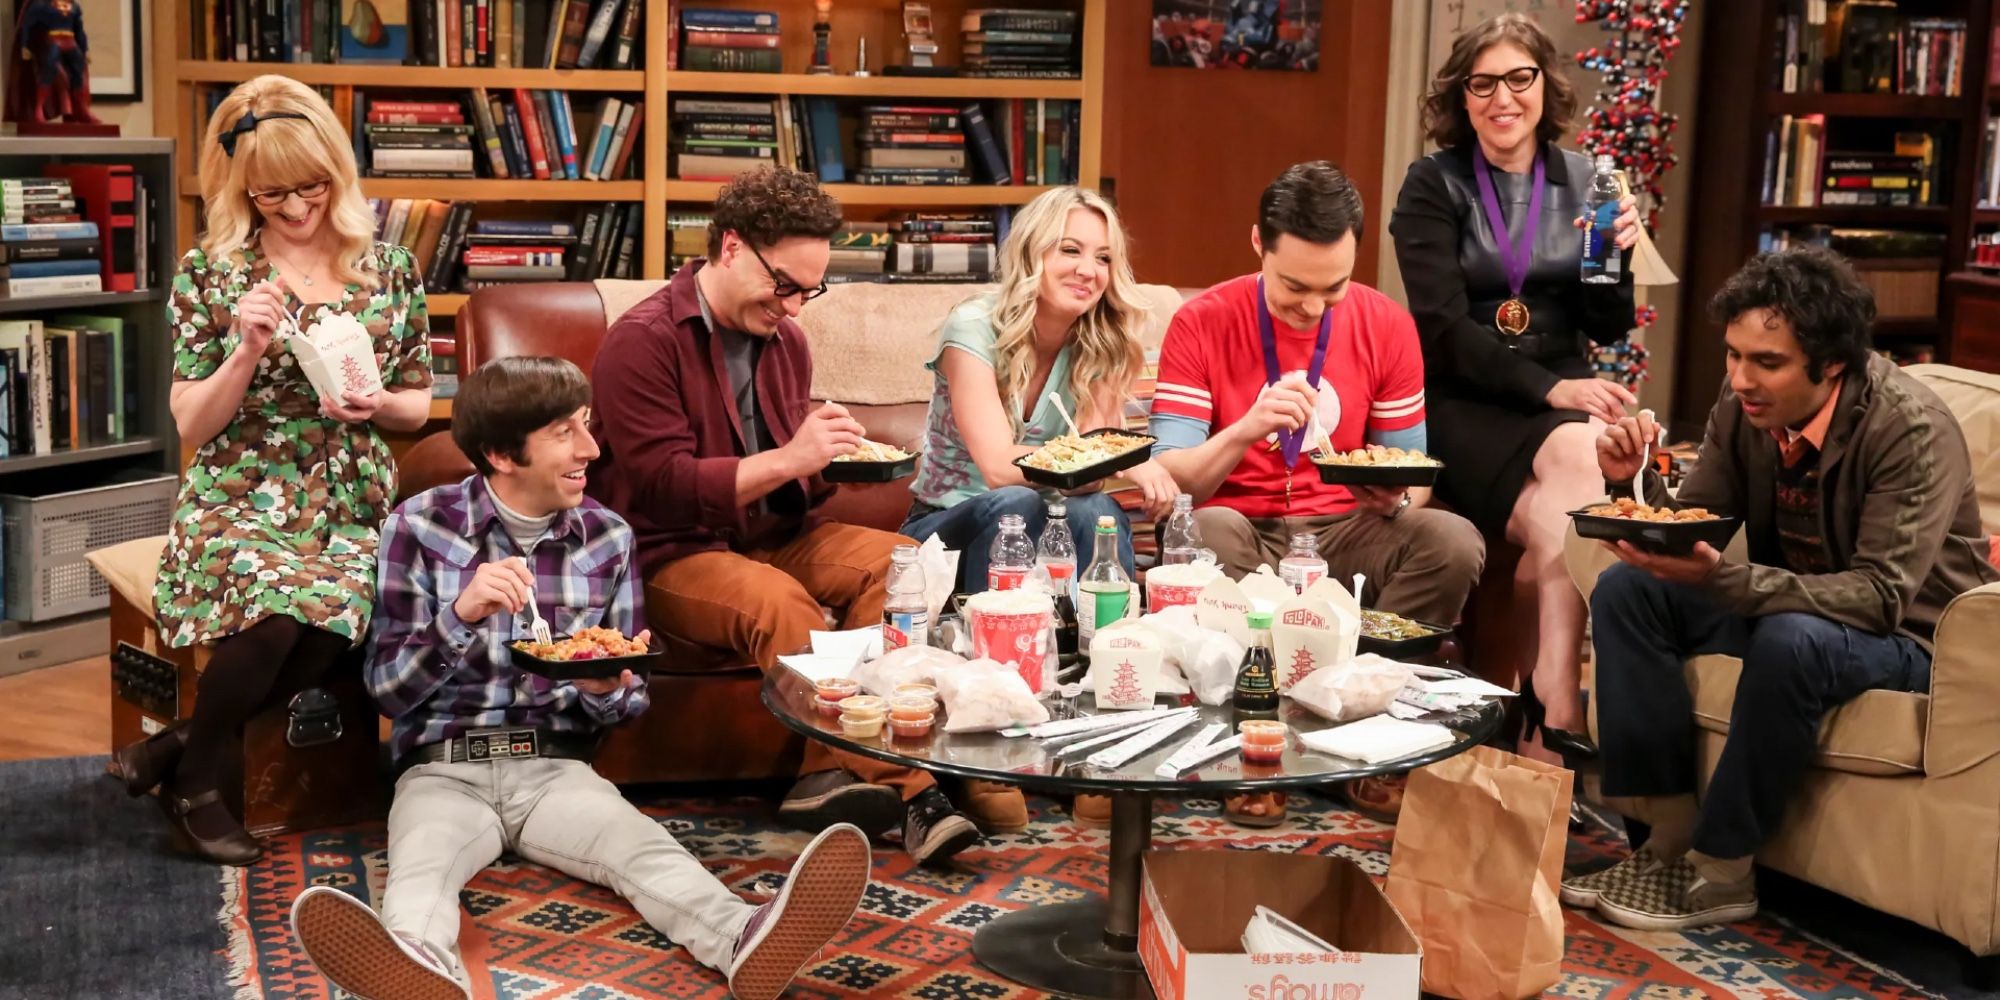 The main cast of The Big Bang Theory.